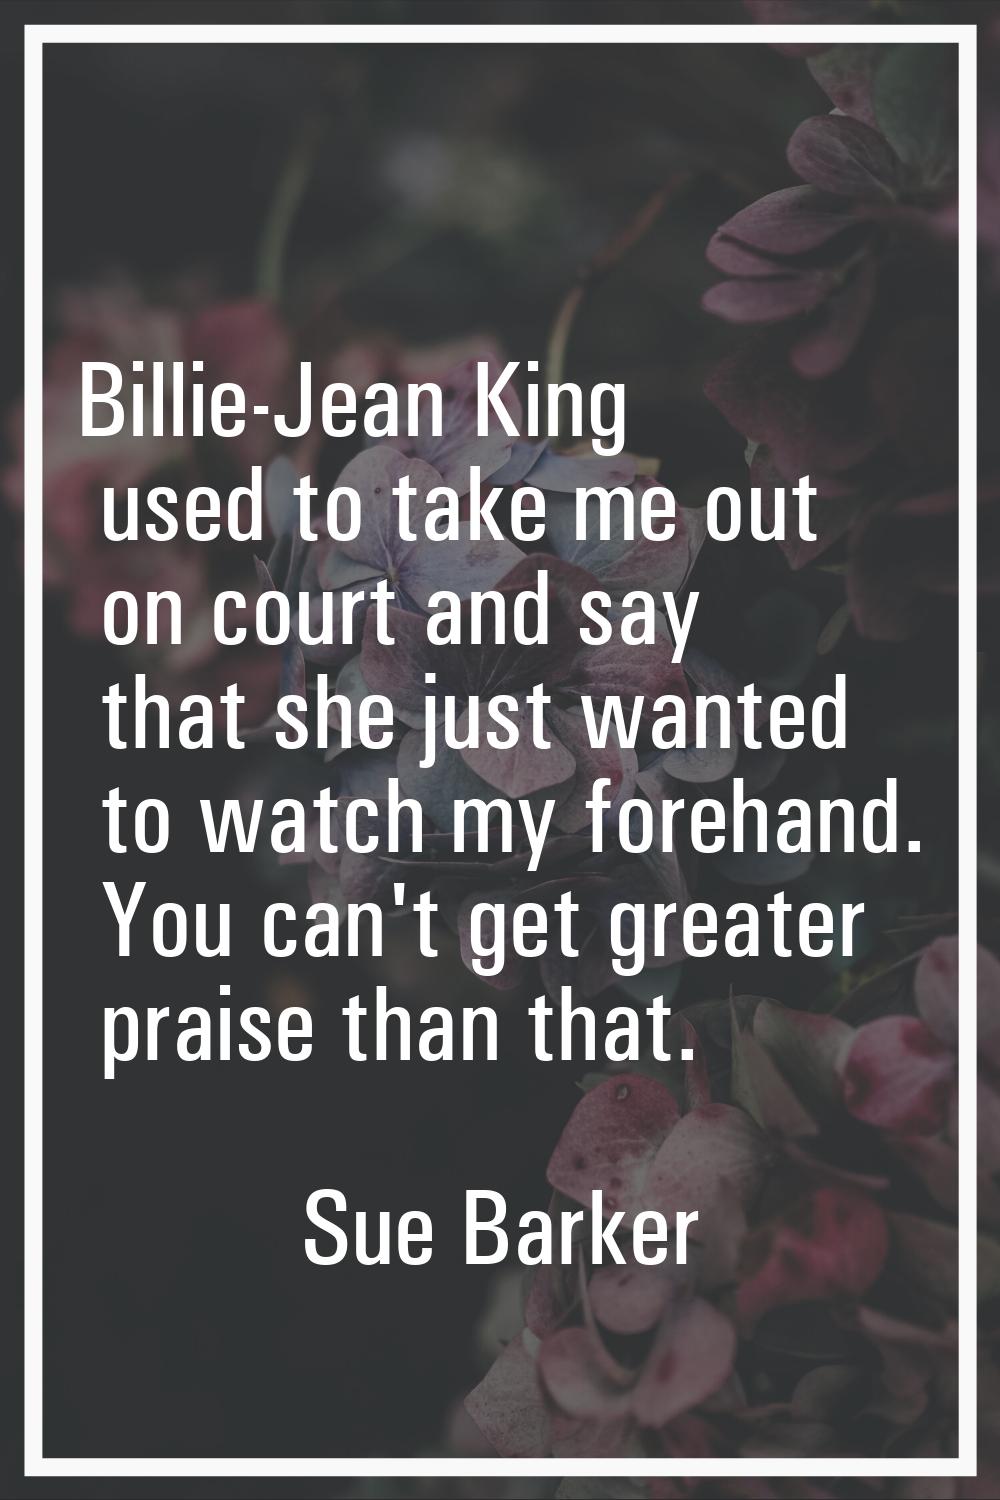 Billie-Jean King used to take me out on court and say that she just wanted to watch my forehand. Yo